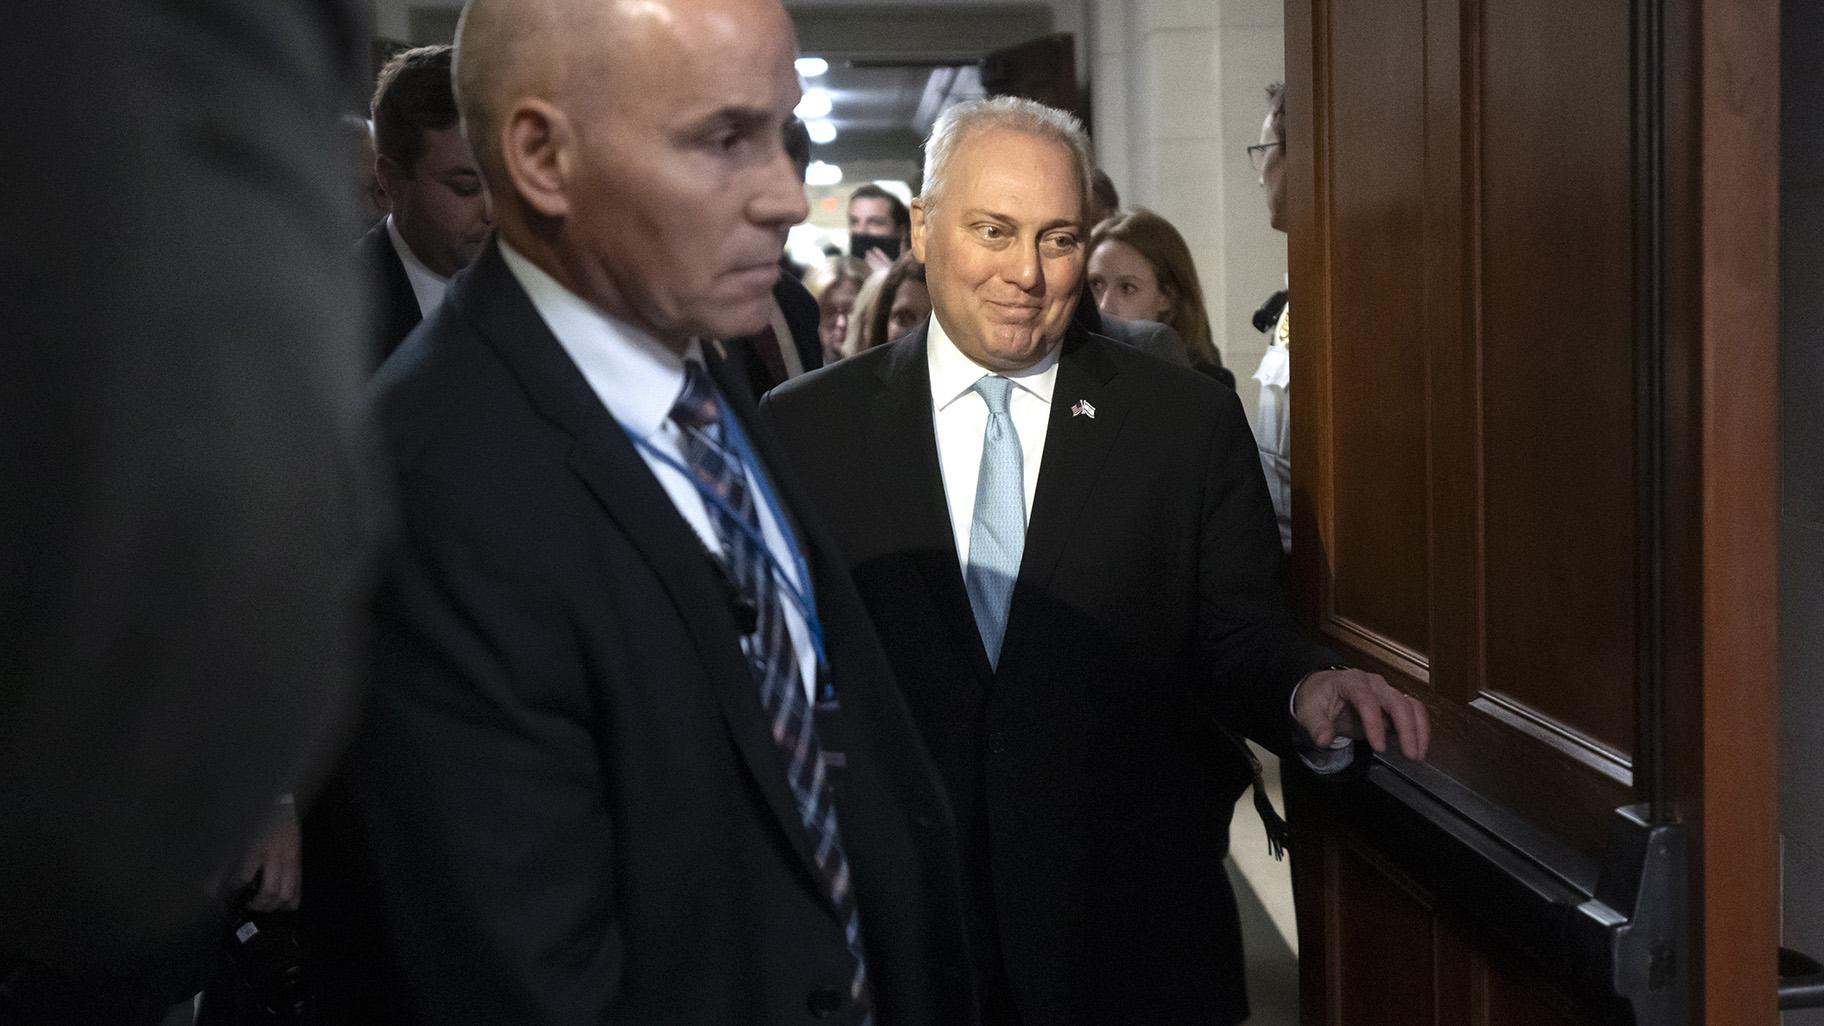 Majority Leader Steve Scalise, R-La., leaves after a closed-door meeting of House Republicans during which he was chosen as their candidate for Speaker of the House on Capitol Hill, Wednesday, Oct. 11, 2023 in Washington. (AP Photo / Mark Schiefelbein)